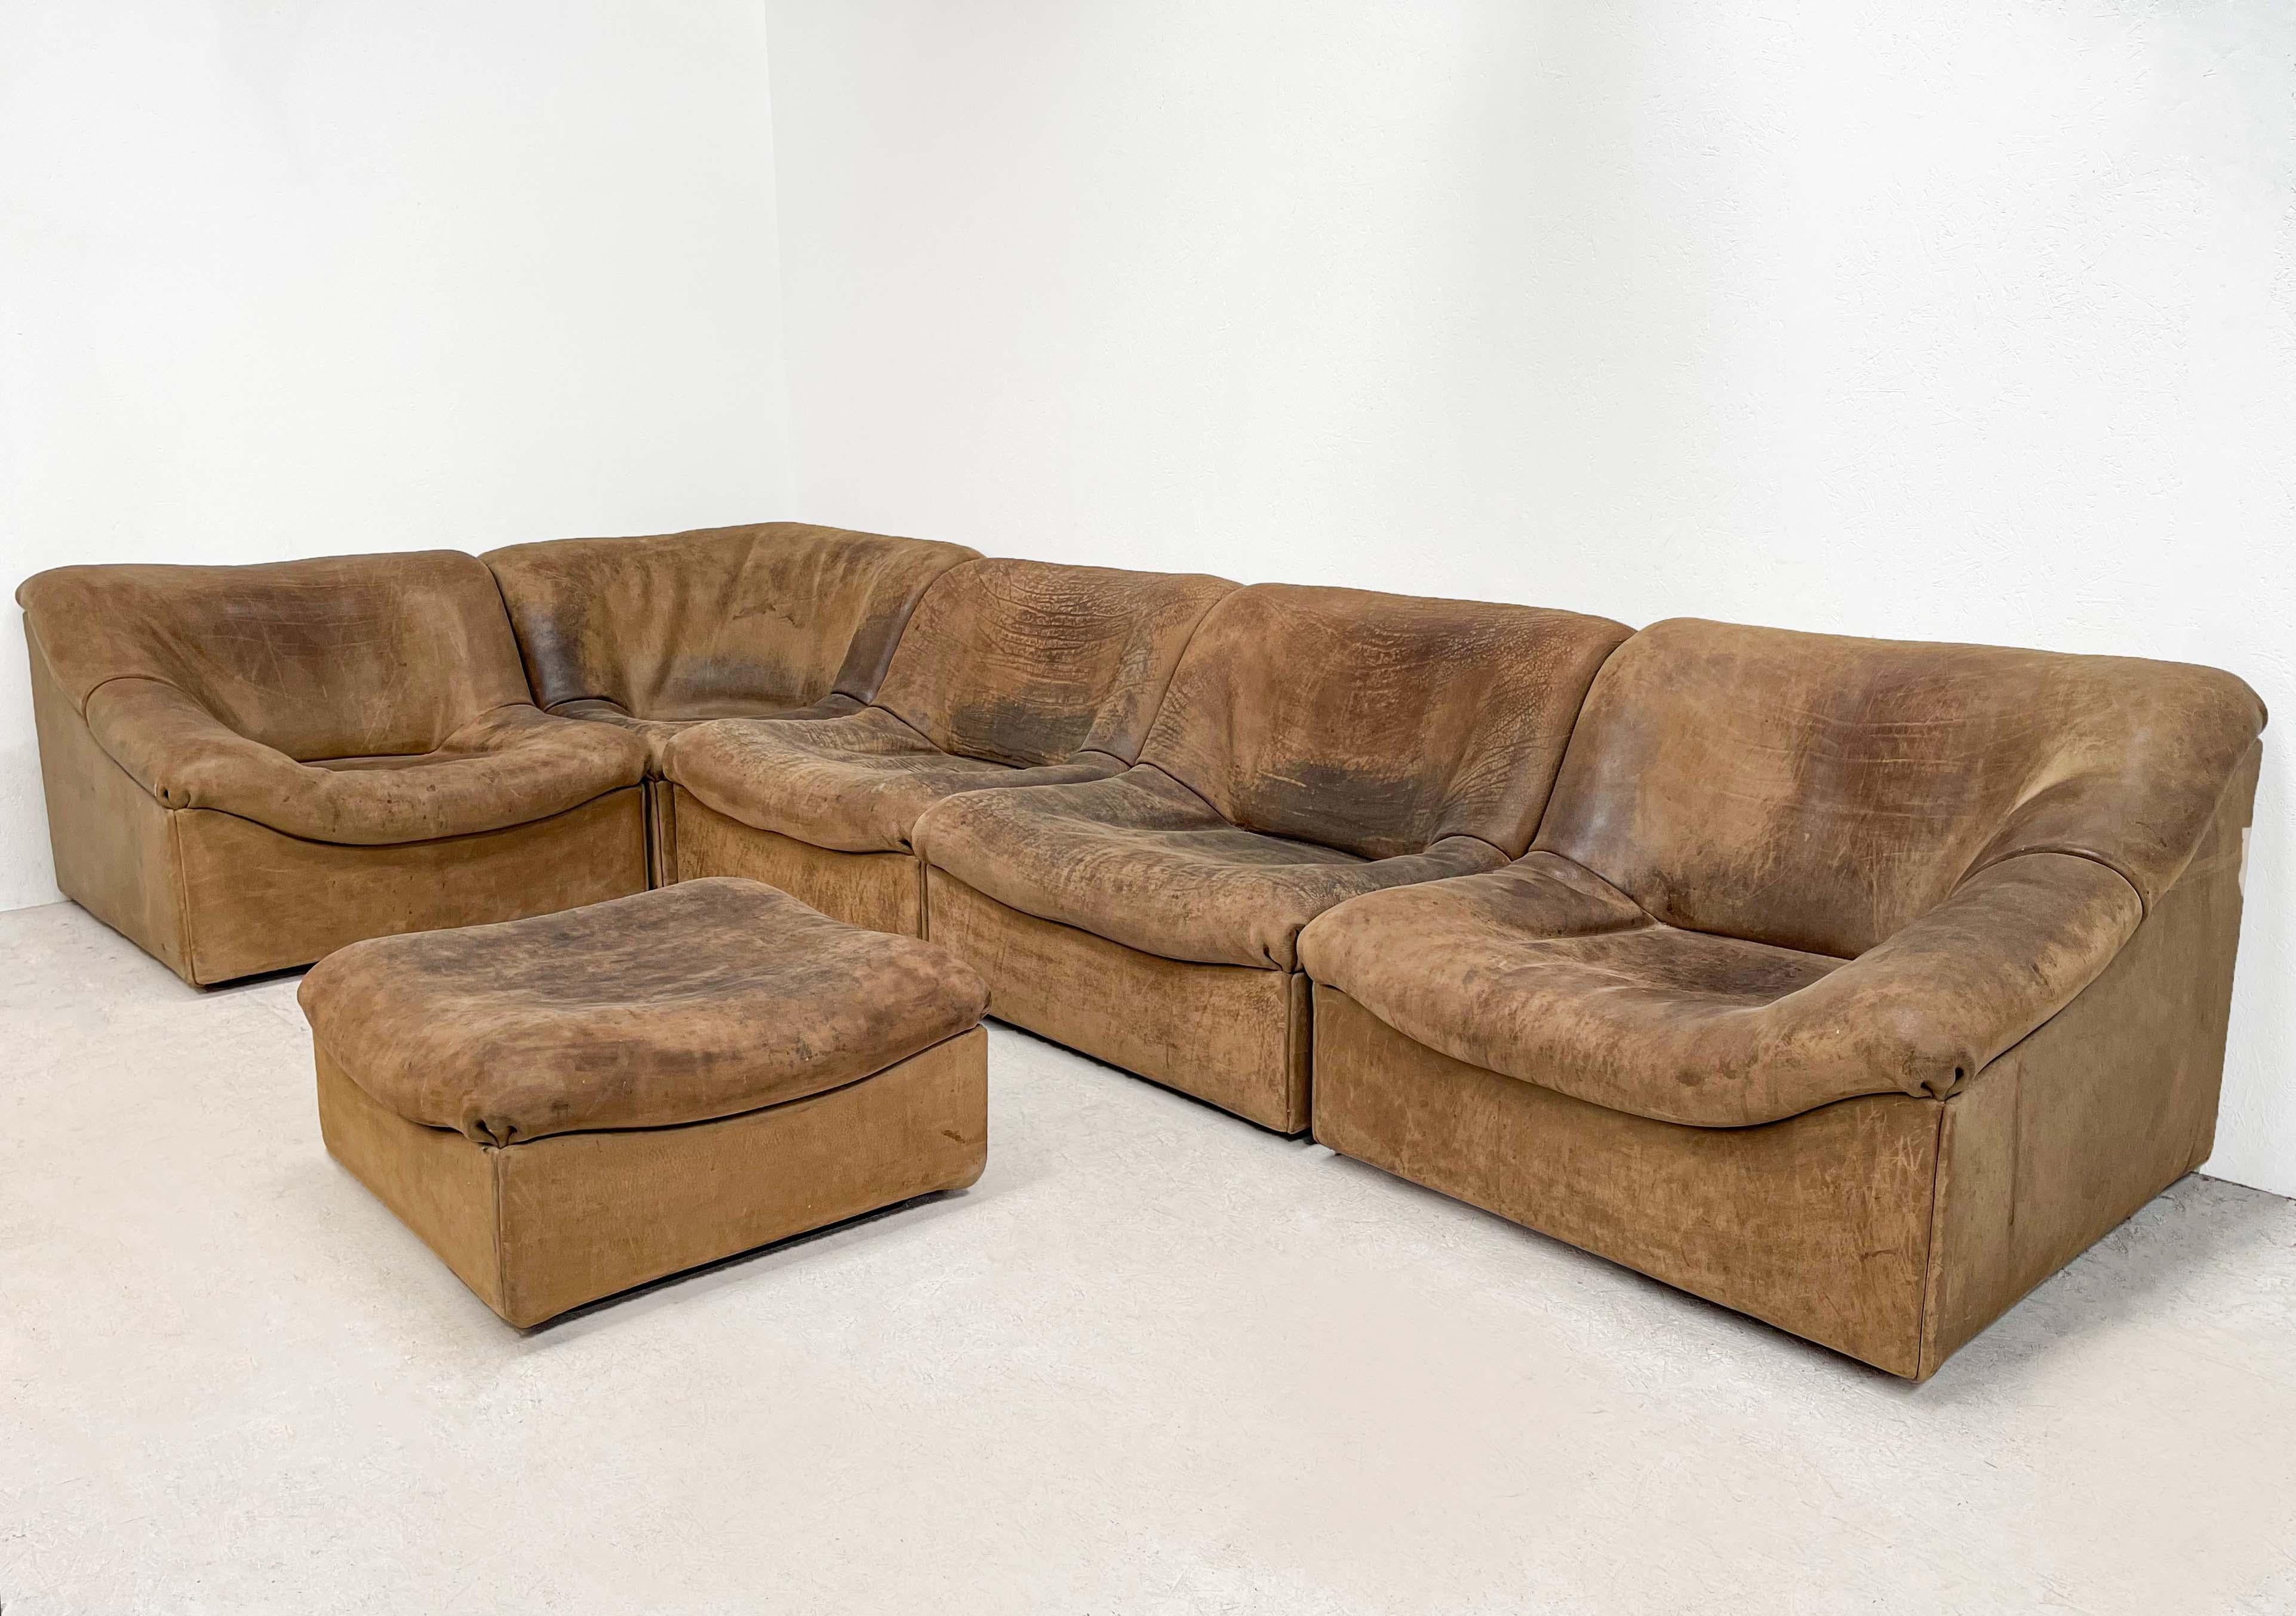 A very impressive sofa from one of the most famous furniture manufacturers in Switzerland De Sede. De Sede designed this sofa in the 70s. This DS46 is from the 80s. It consists of 5 pieces and 1 rare ottoman. 

For those who love patina this is